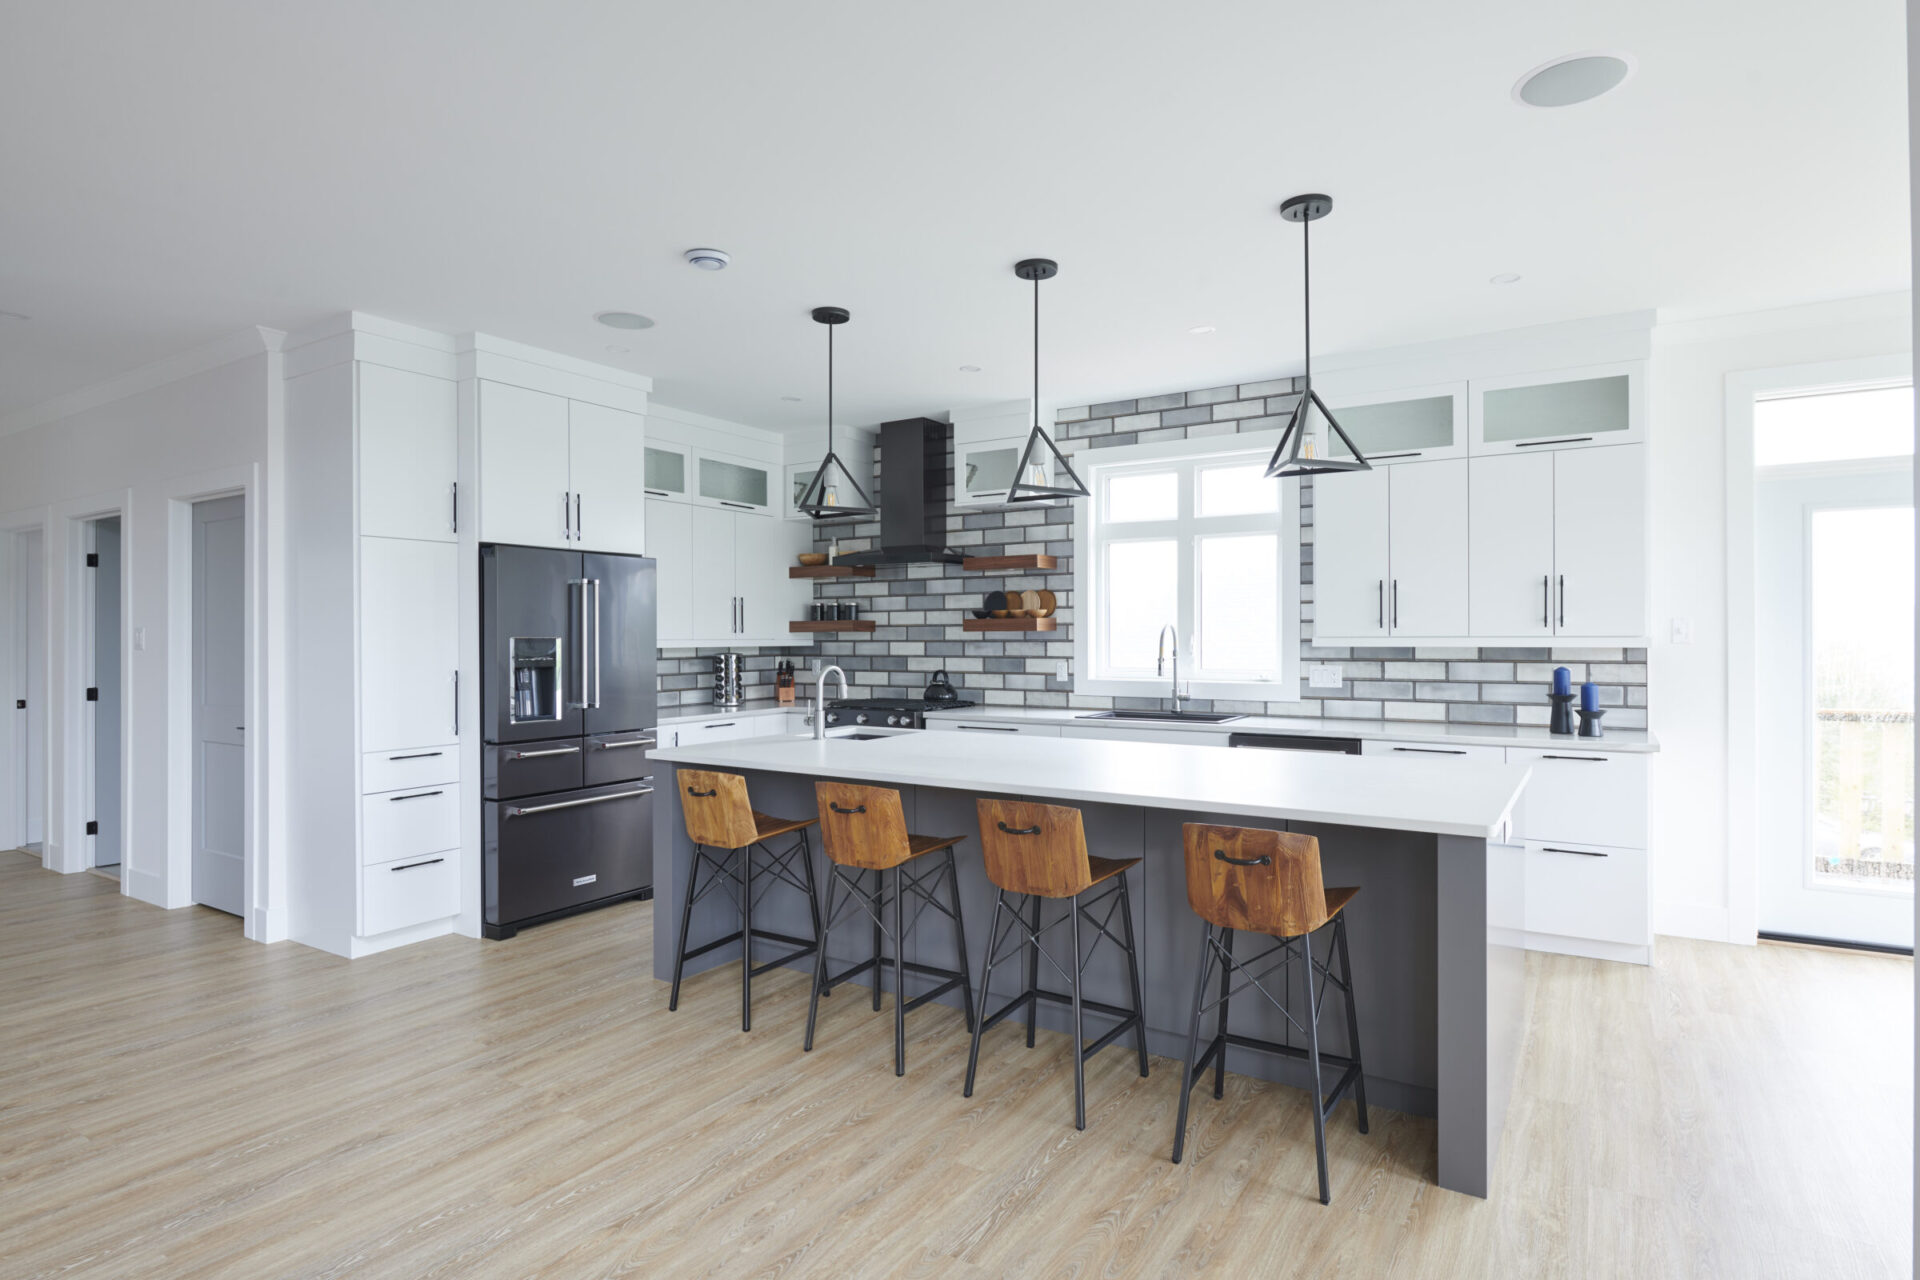 Modern kitchen interior with a central island, wooden stools, black appliances, white cabinetry, gray backsplash tiles, and pendant lighting. No people visible.